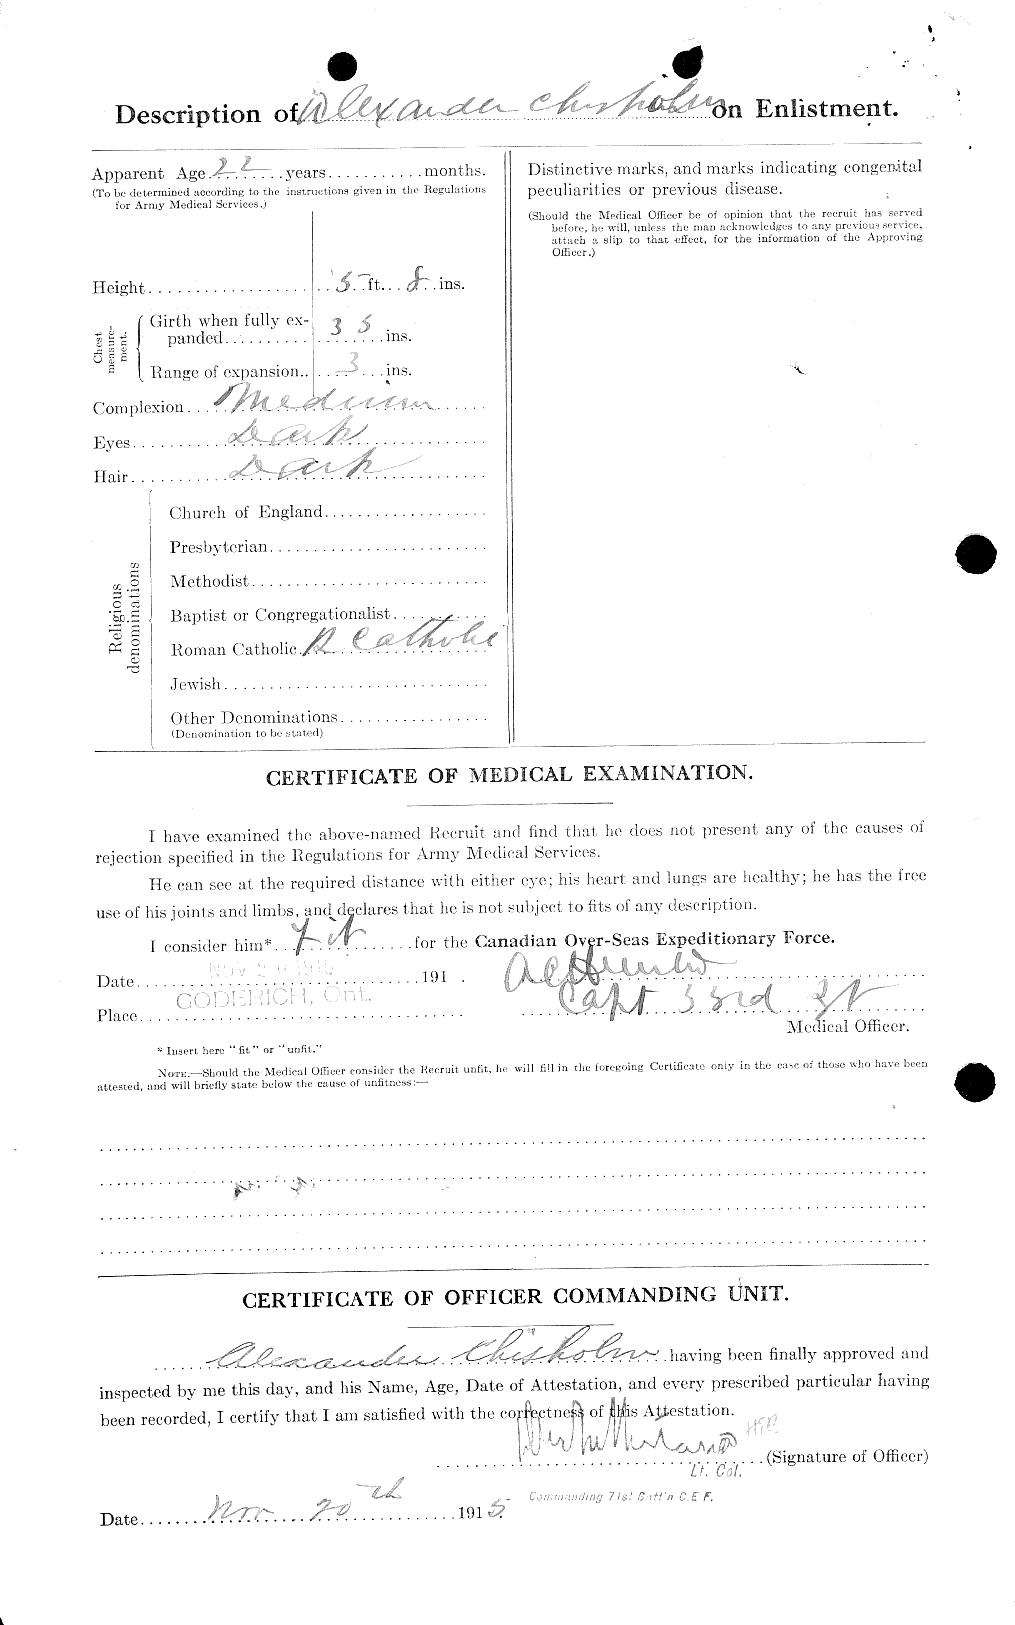 Personnel Records of the First World War - CEF 018183b